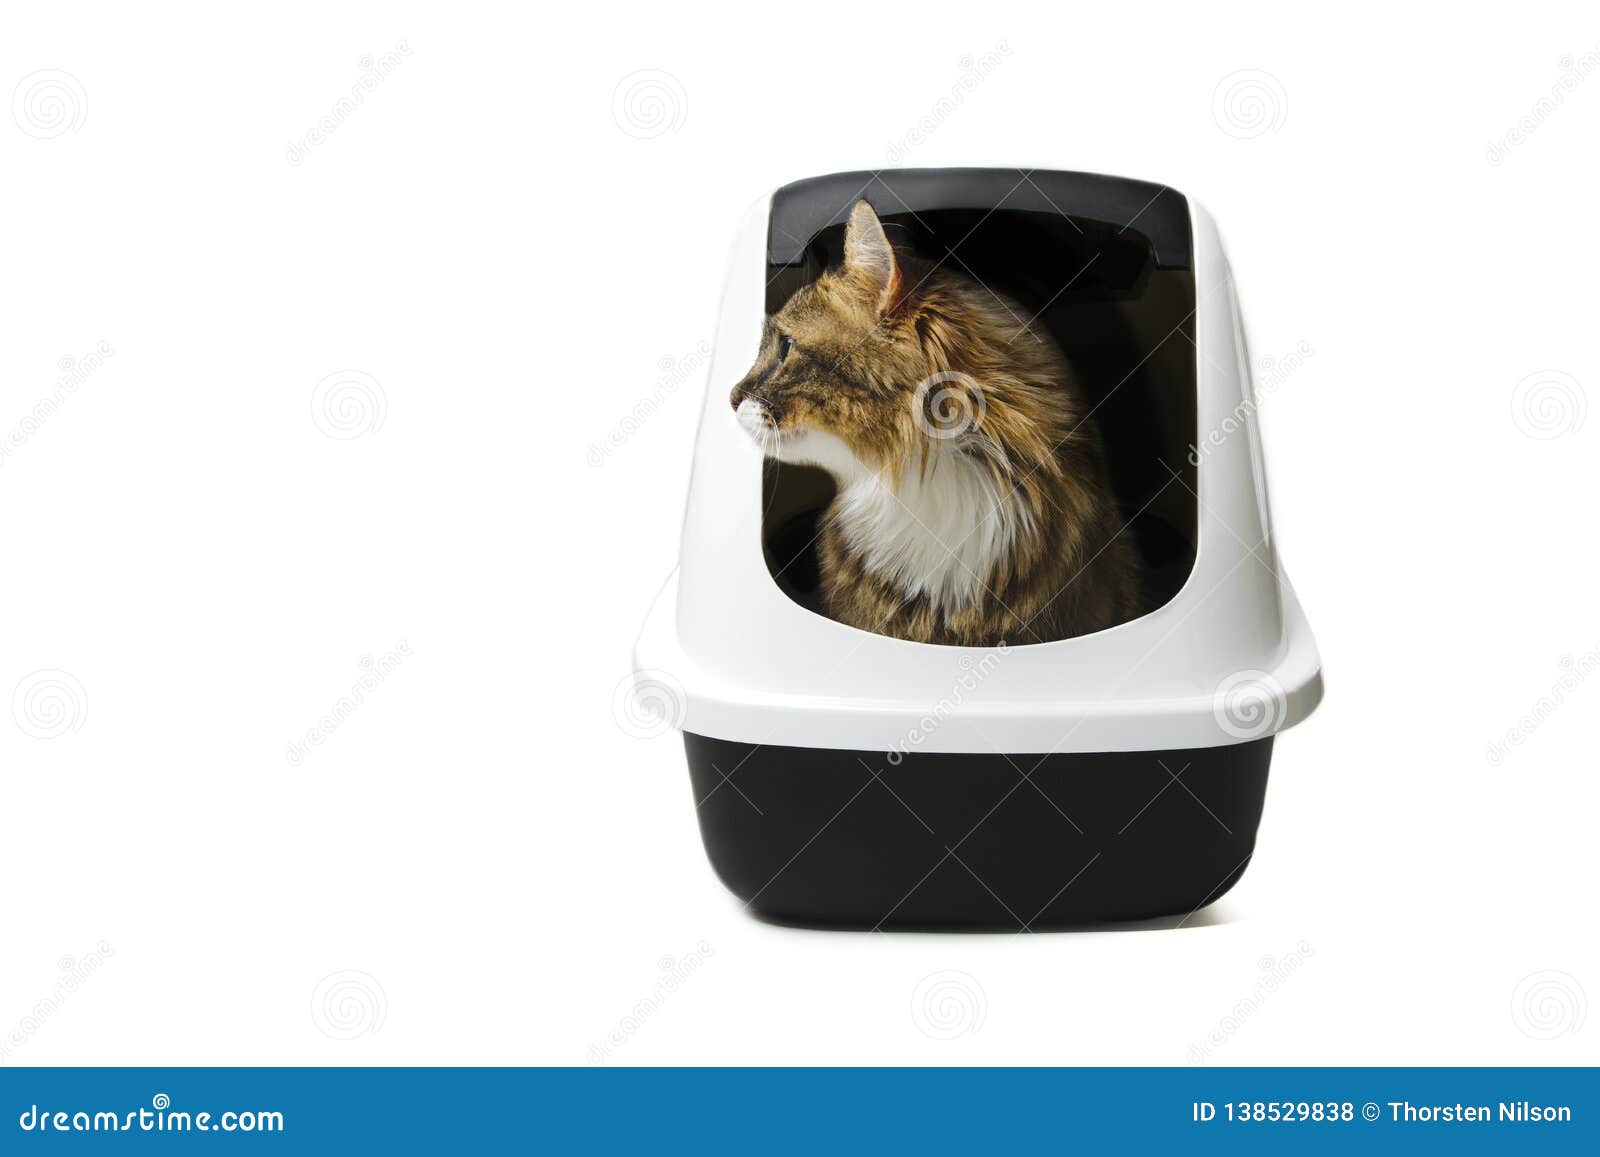 Cute Maine Coon Cat Sitting In A Litter Box And Looking Curious